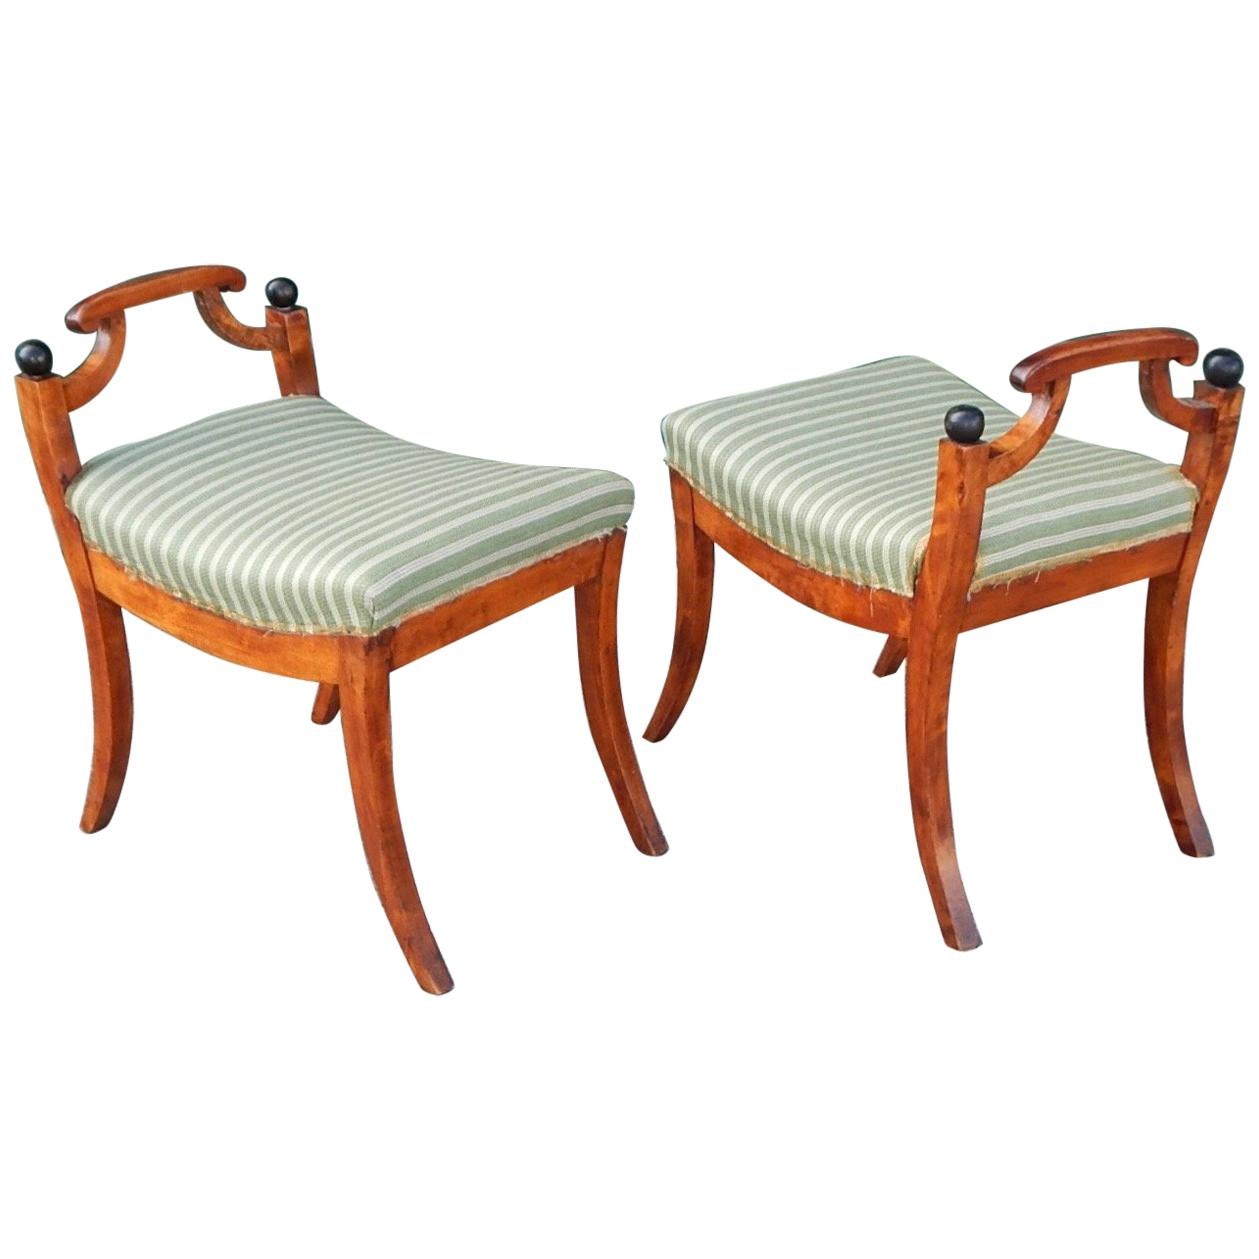 Pair of Swedish Biedermeier Revival Benches or Foot Stools, 1920s For Sale